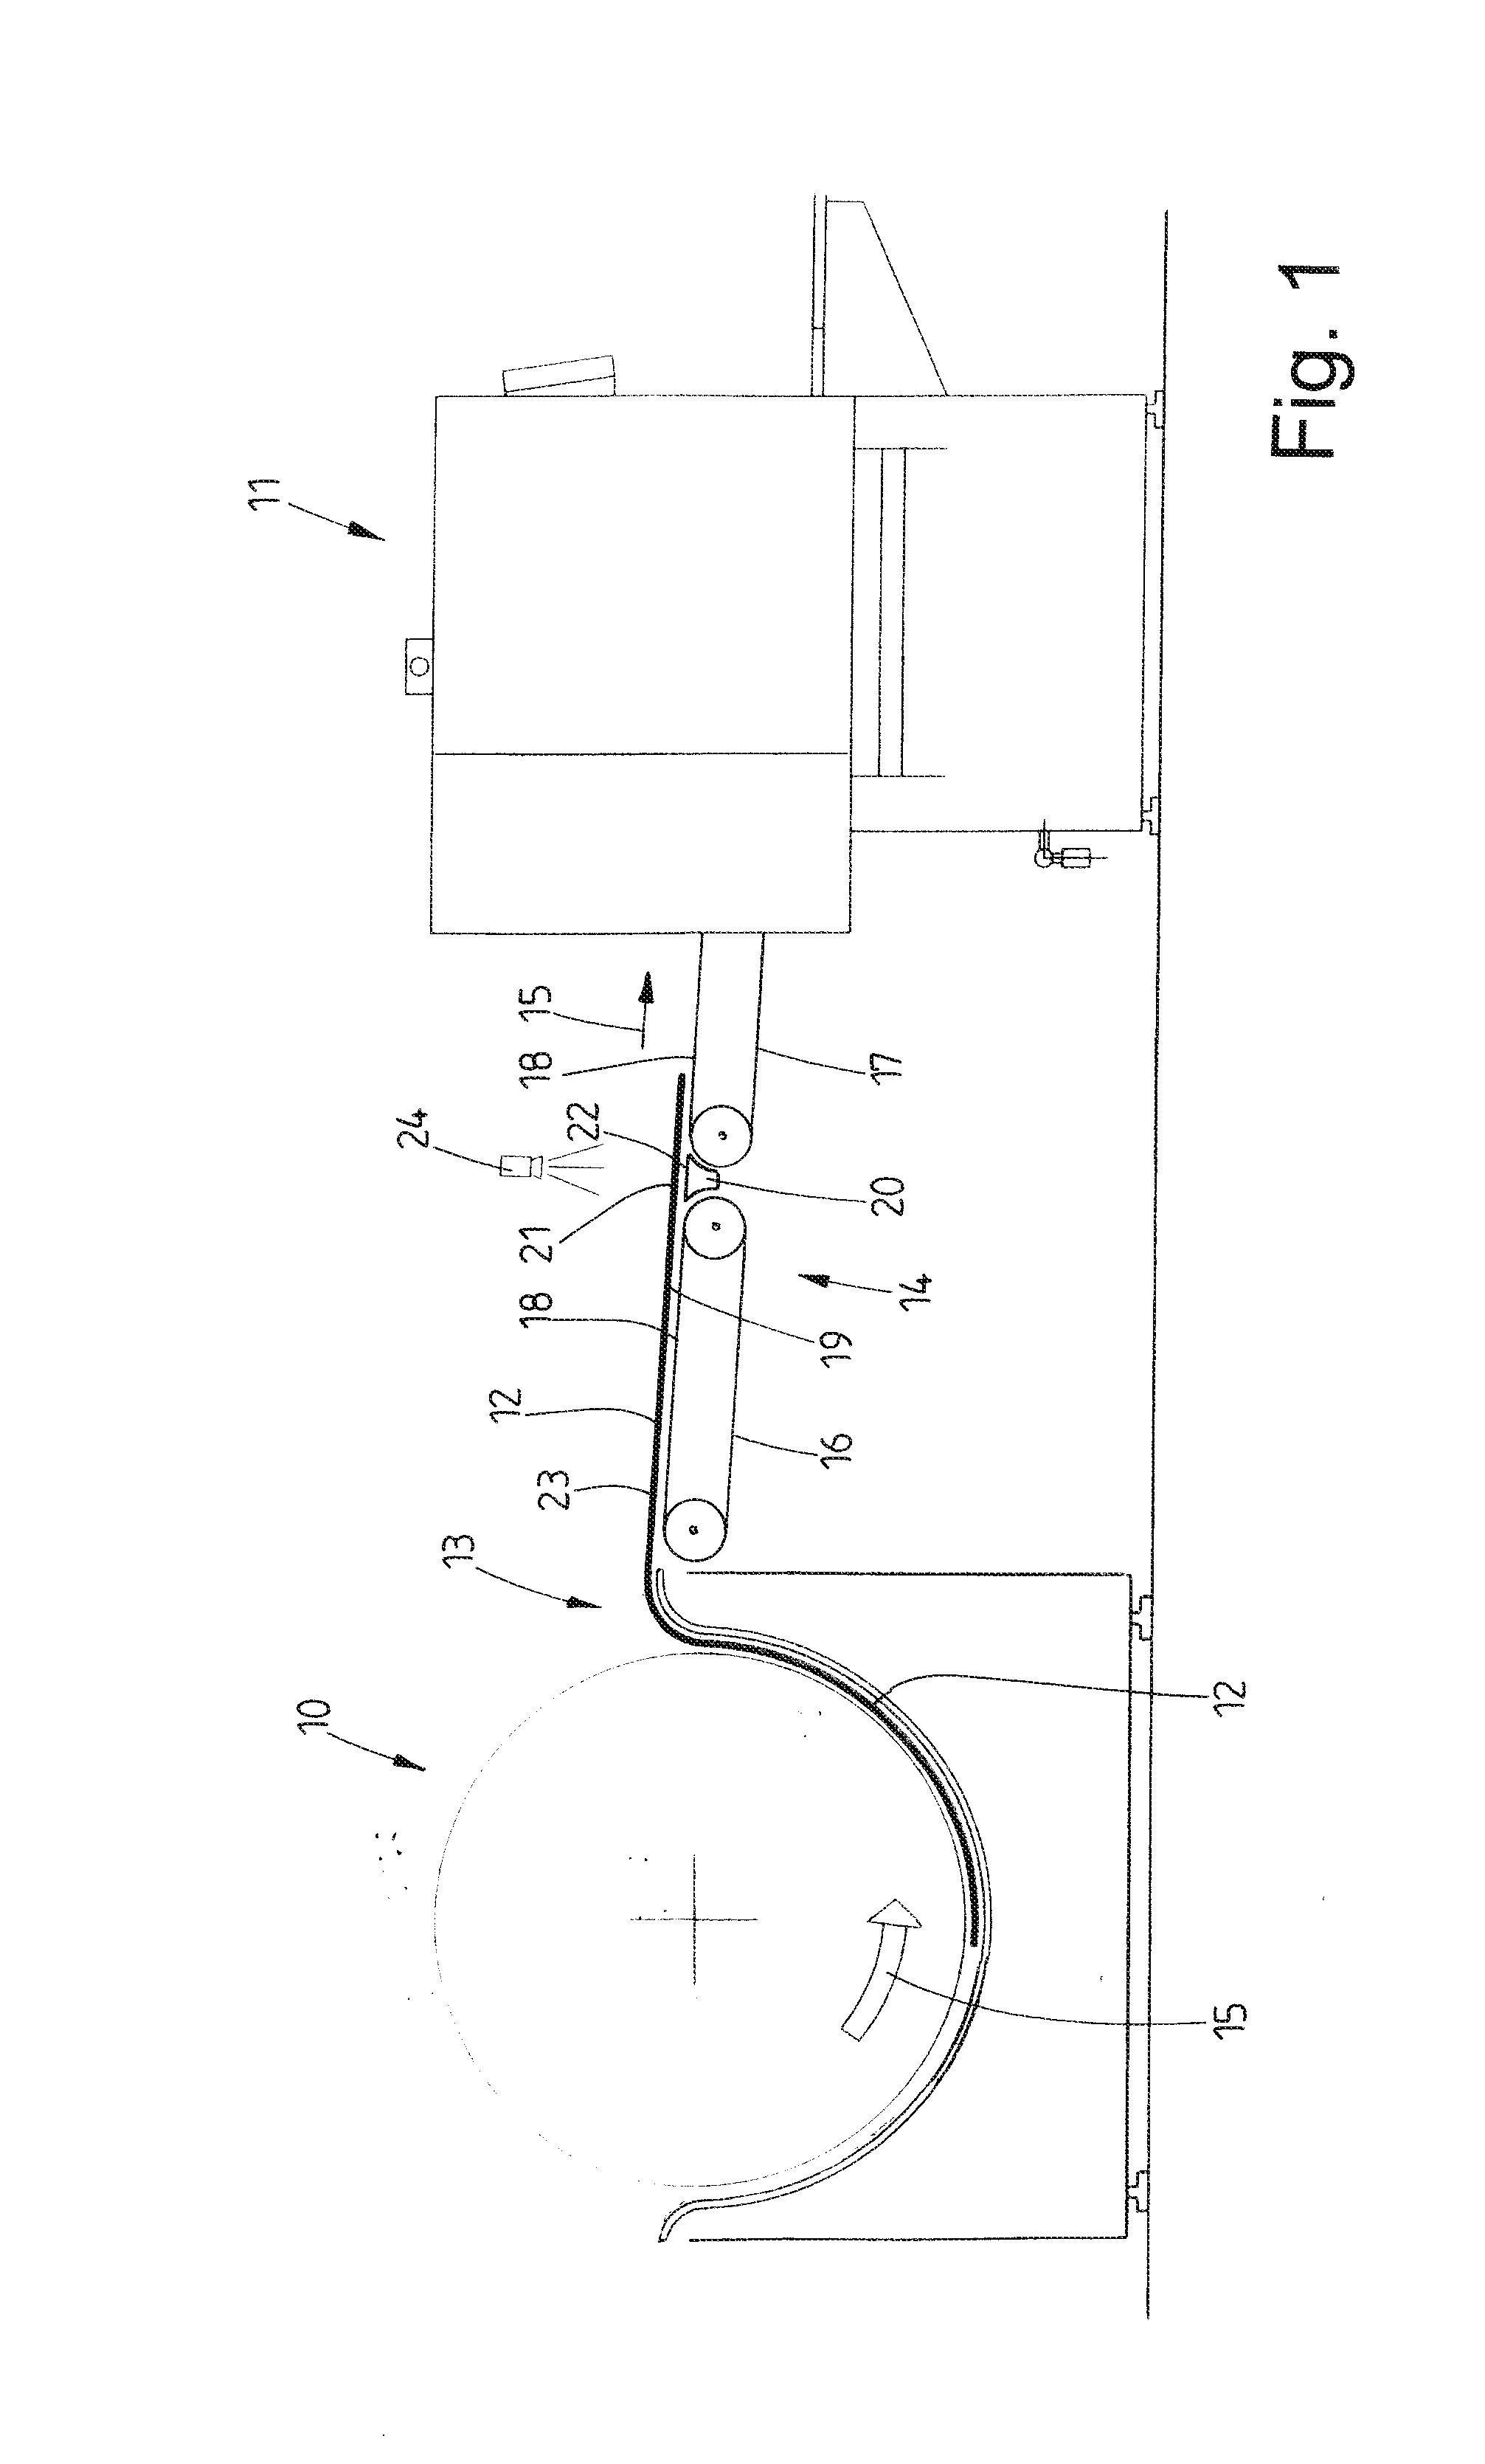 Method for examining washed or cleaned items of laundry